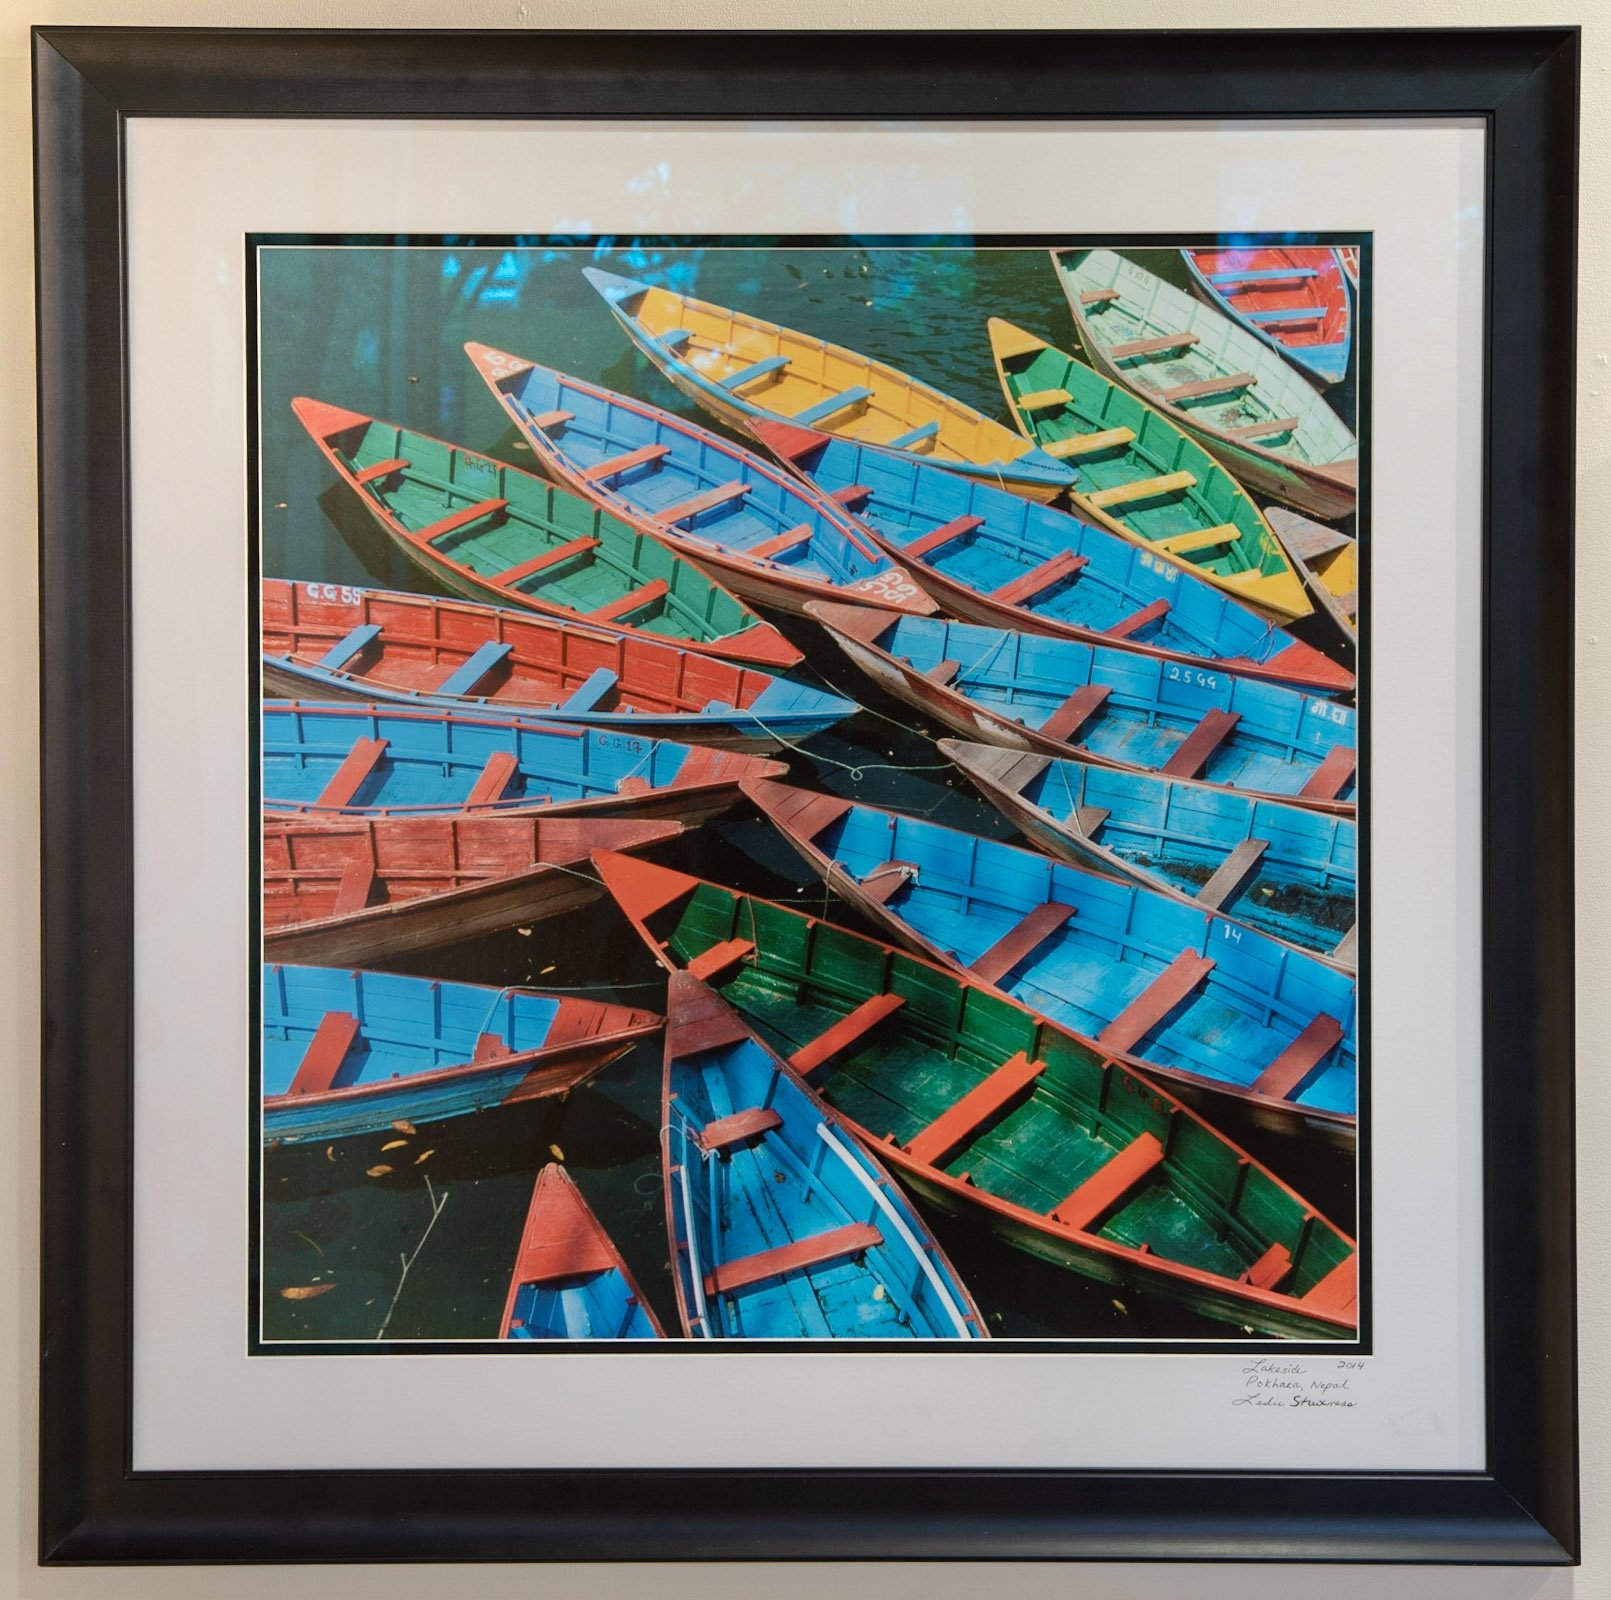 Leslie Struxness, "Primary Colors, Boats in Nepal," Photograph